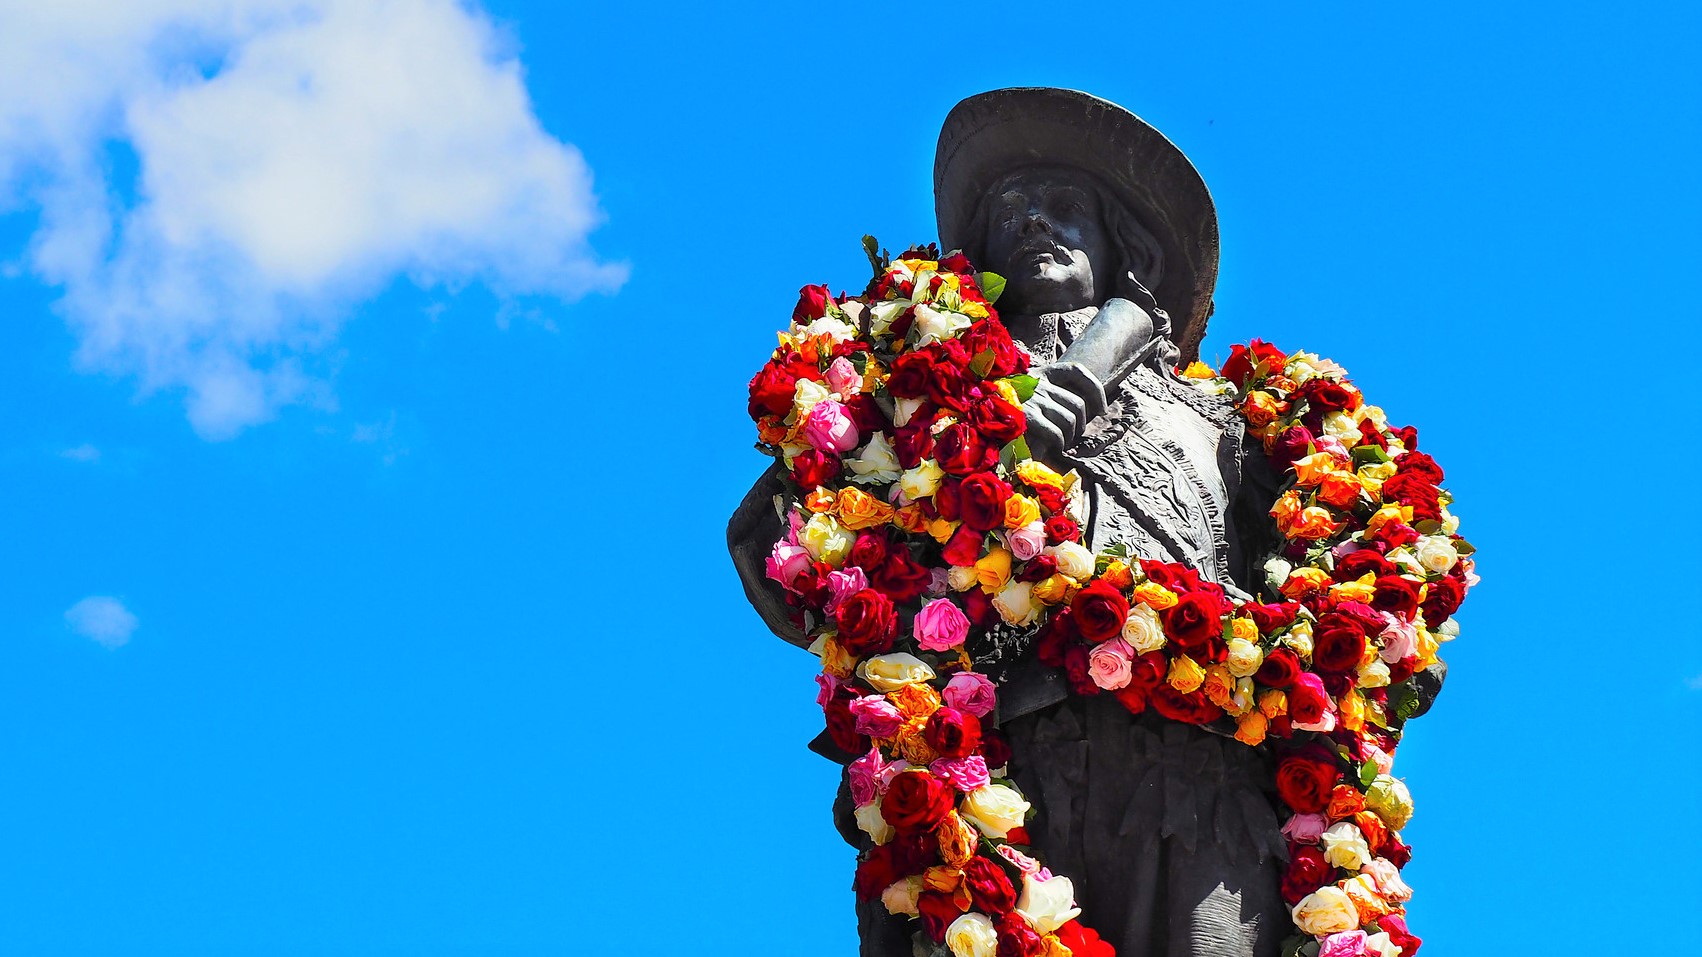 A man's statue, with large flower wreaths on his neck.